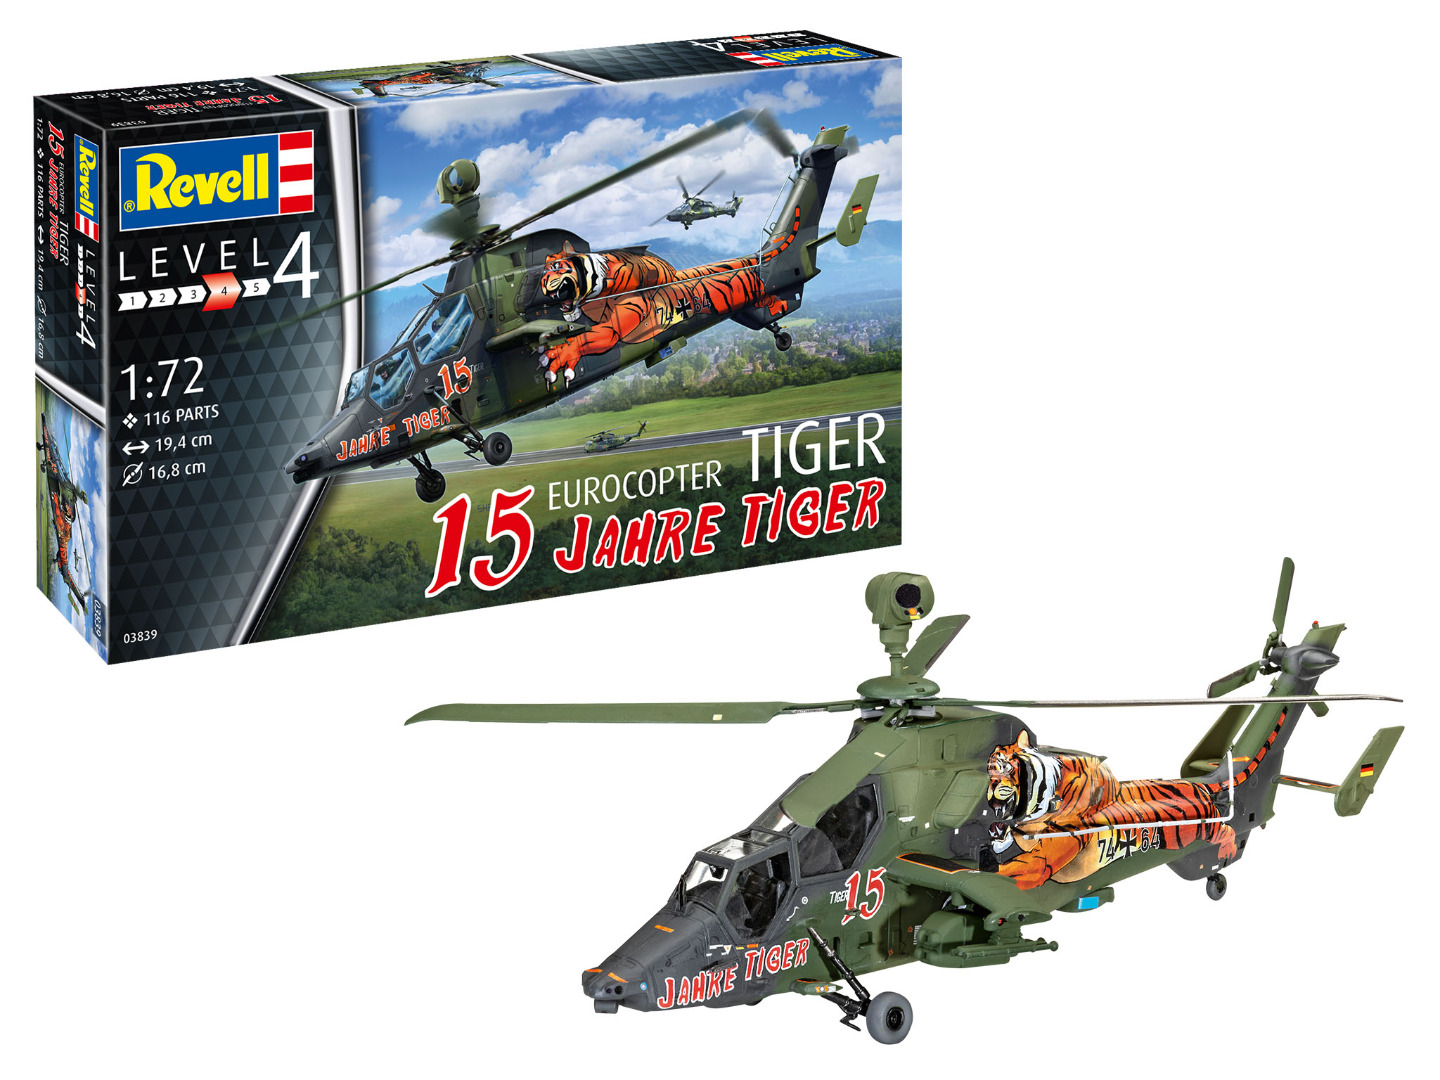 Revell Model Kit Eurocopter Tiger 15 Jahre Tiger Scale 1:72